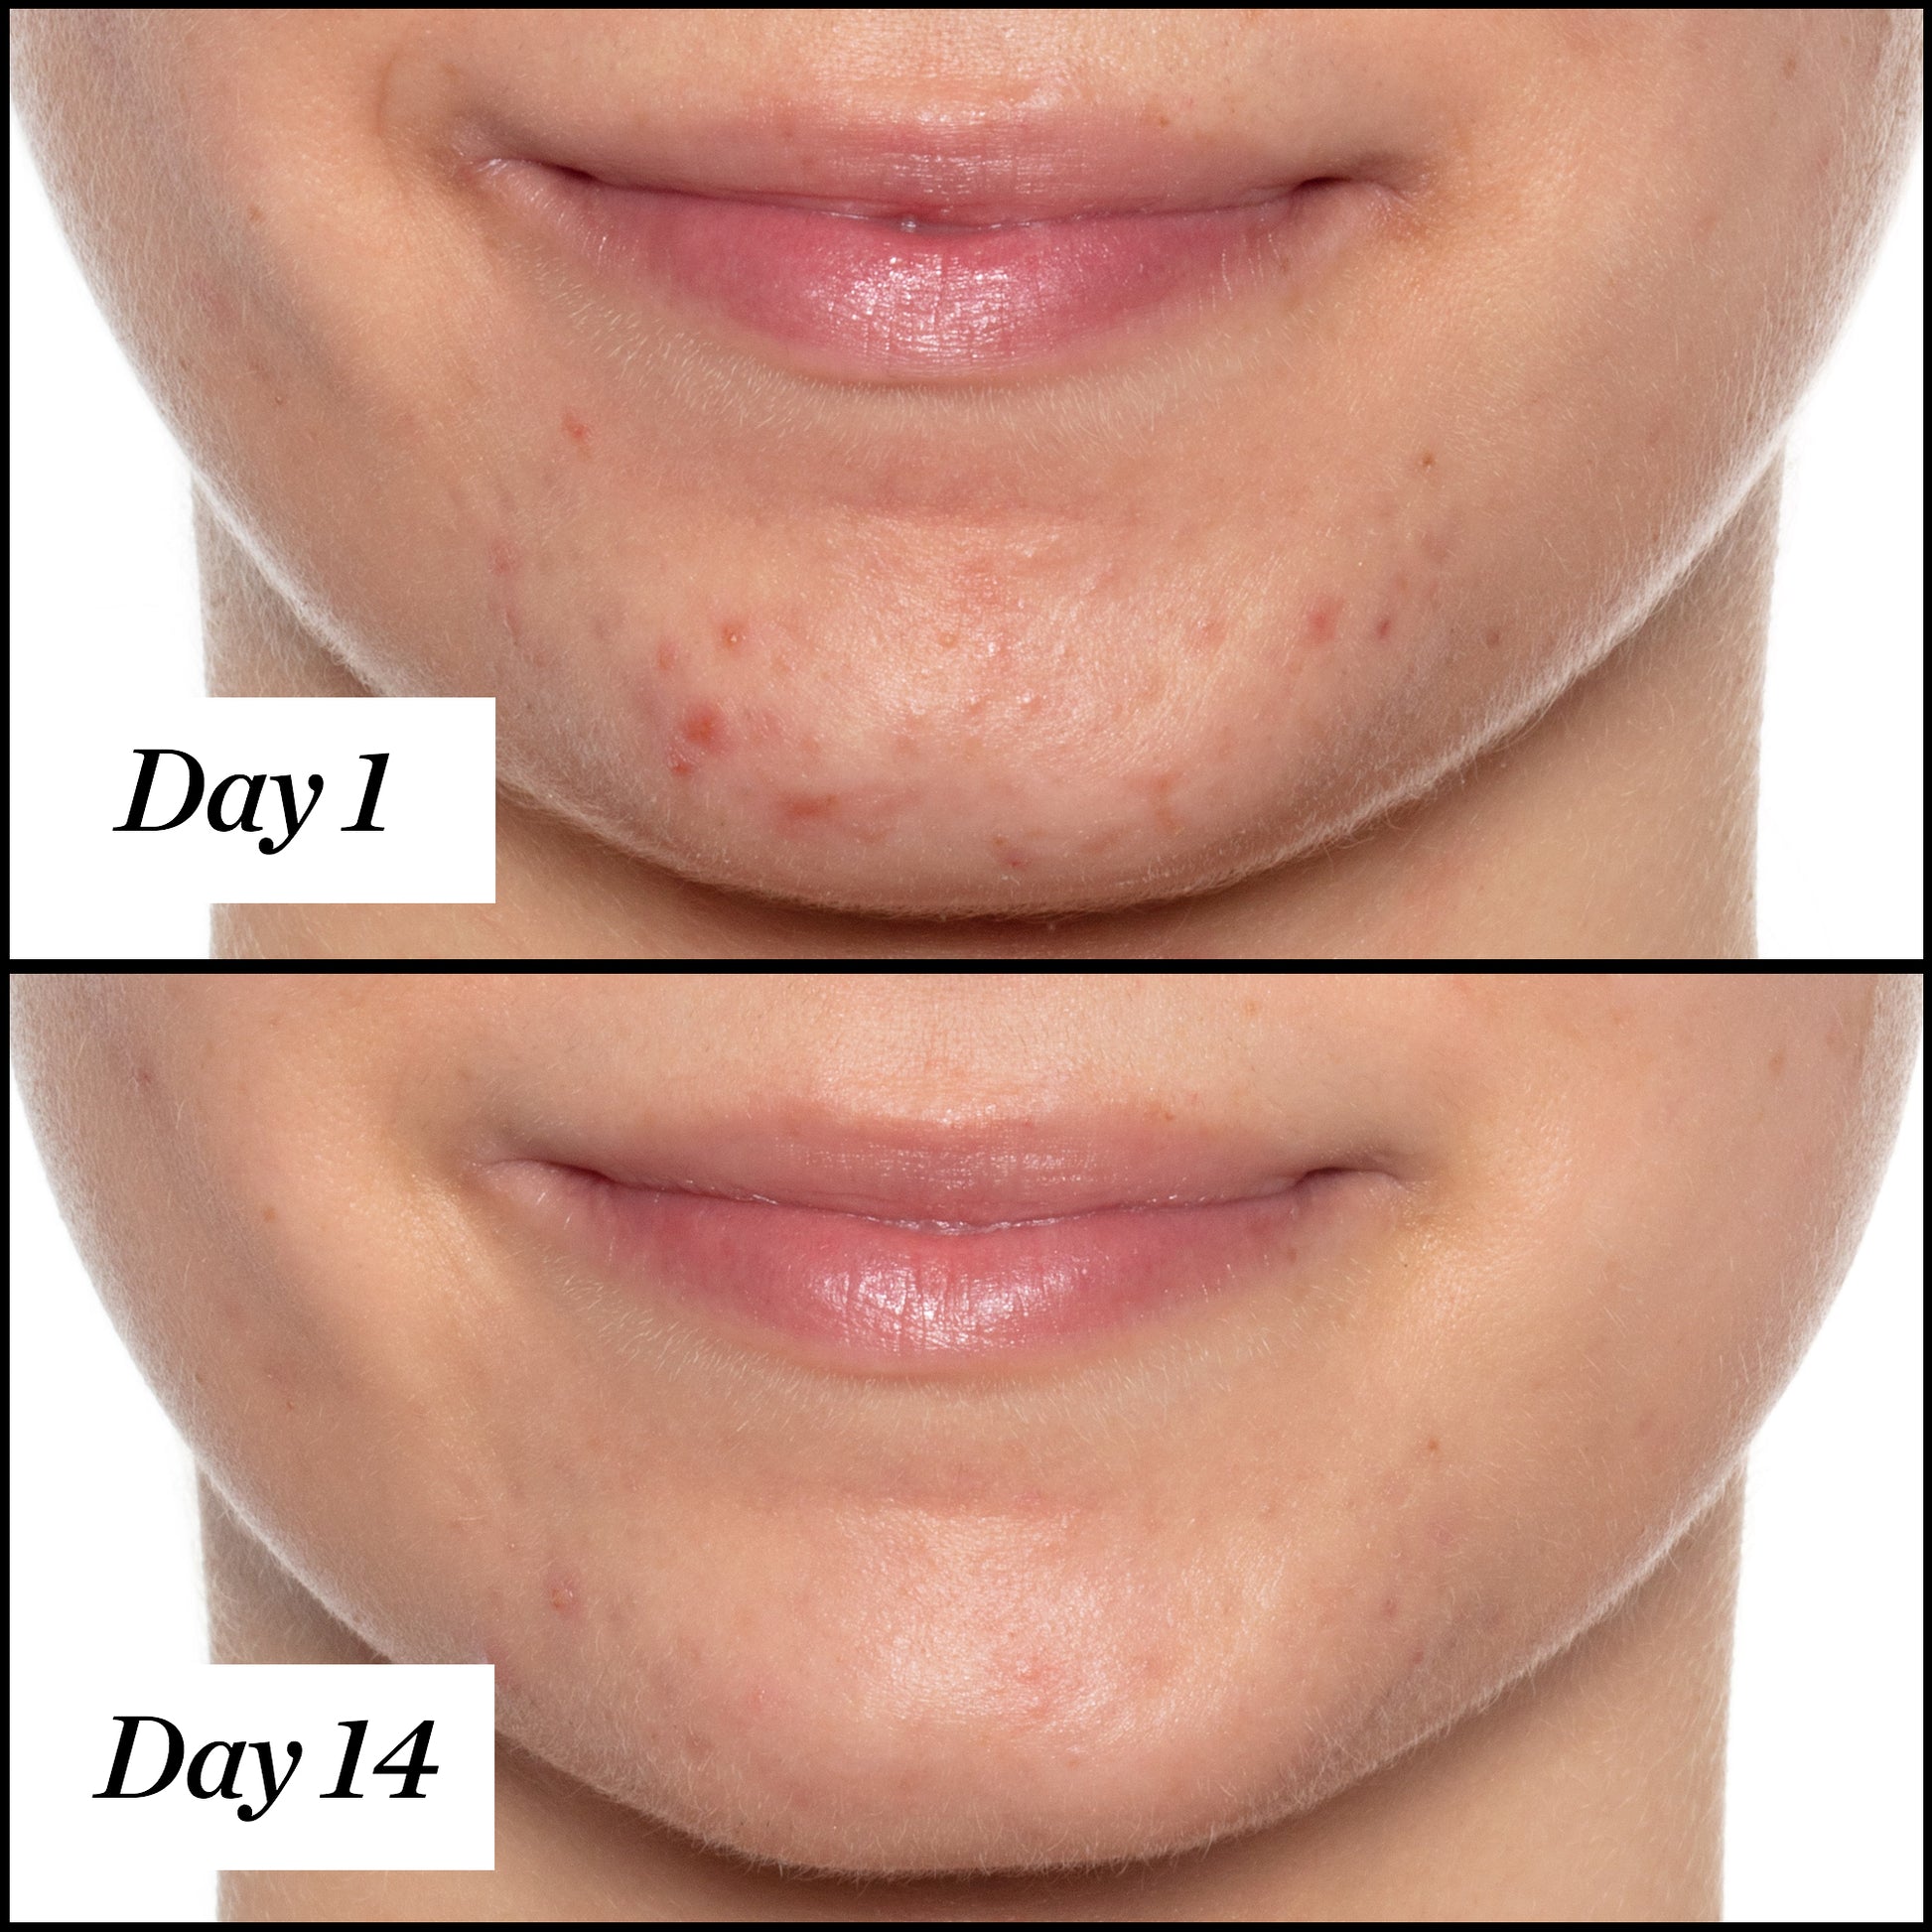 U.F.O. product usage, before and after results from day 1 to day 14. Clear and visible results; reduced redness and acne.